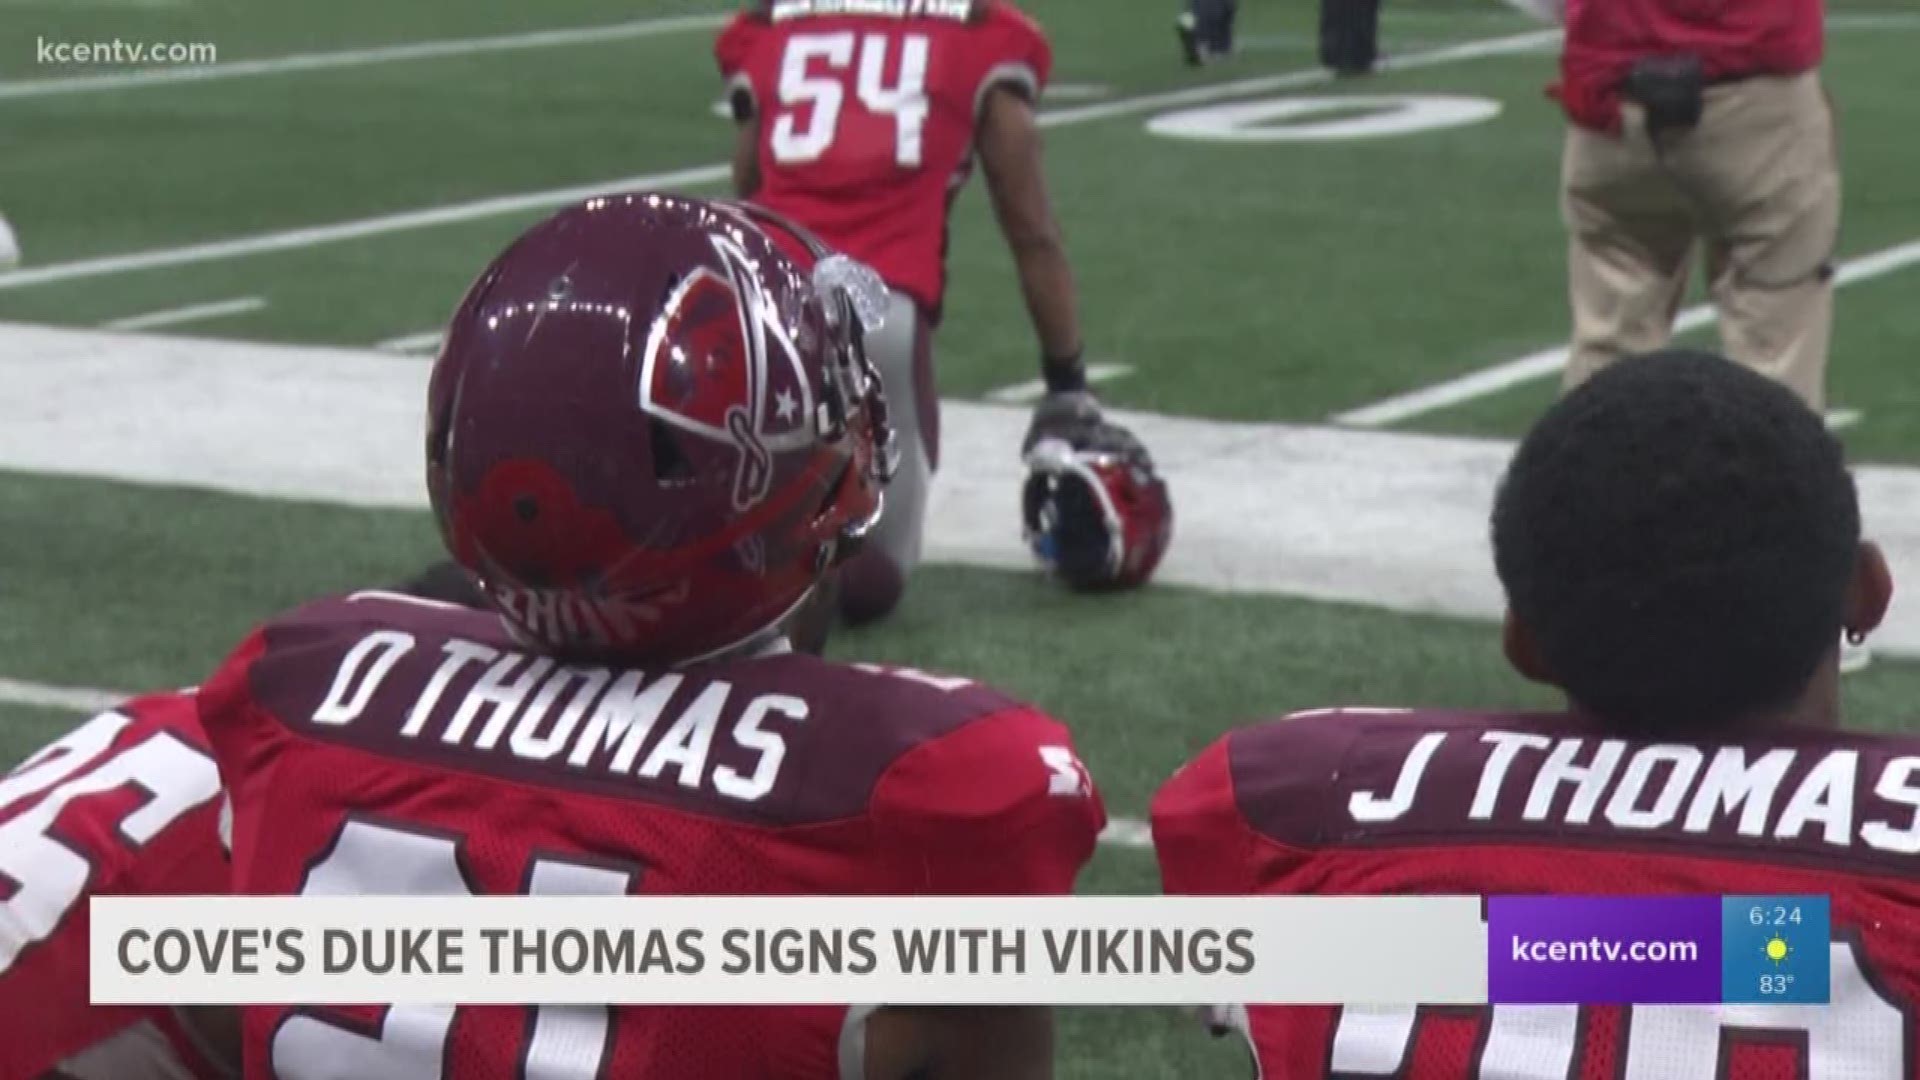 Defensive back Duke Thomas has signed with the Minnesota Vikings, after he played well for the San Antonio Commanders in the AAF.